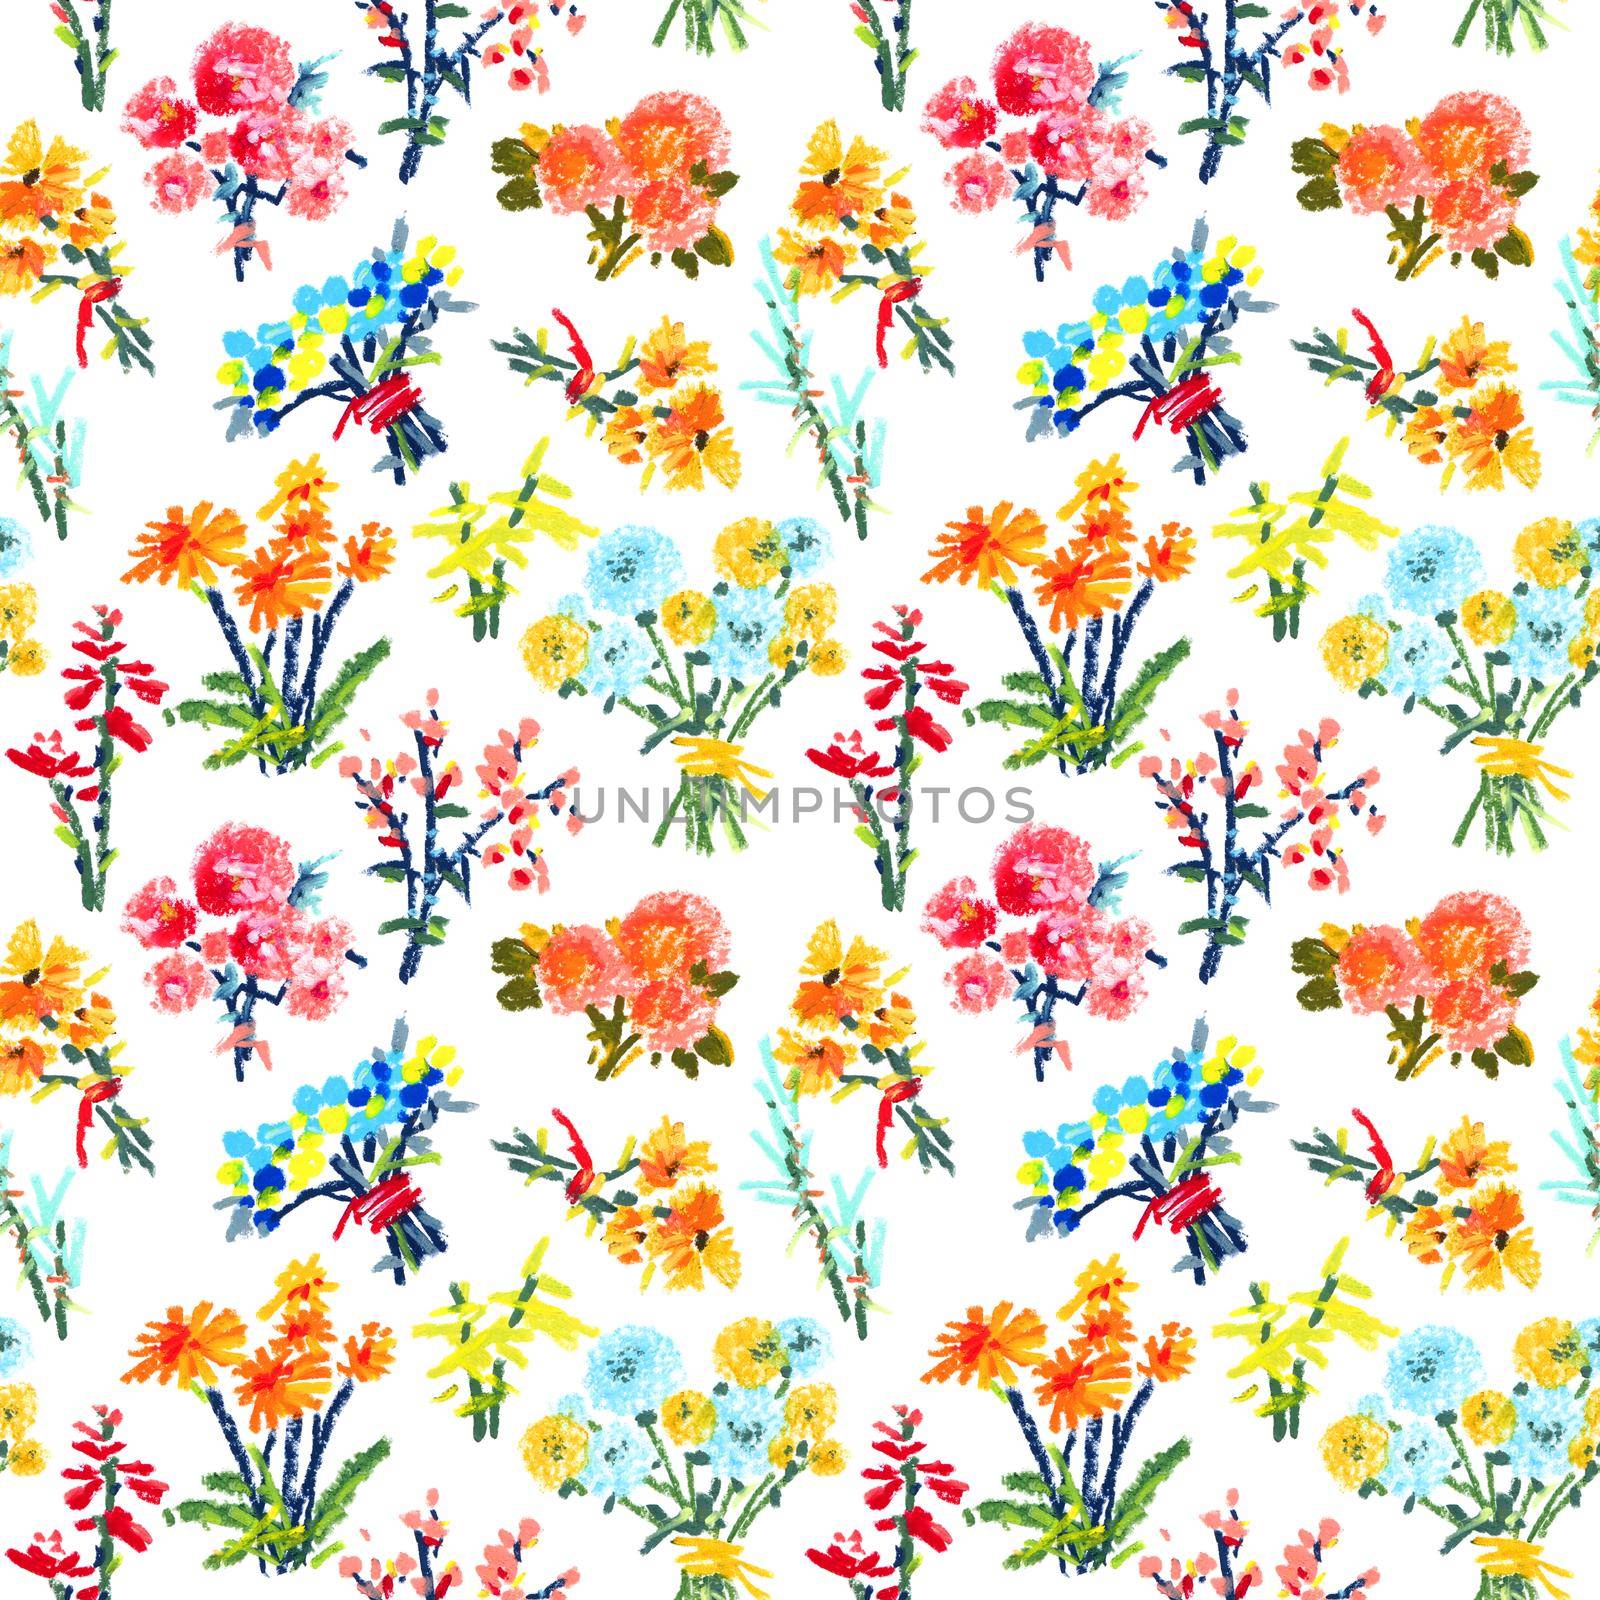 Oil illustration of flowers on white background - bouquets and twigs. Seamless pattern.